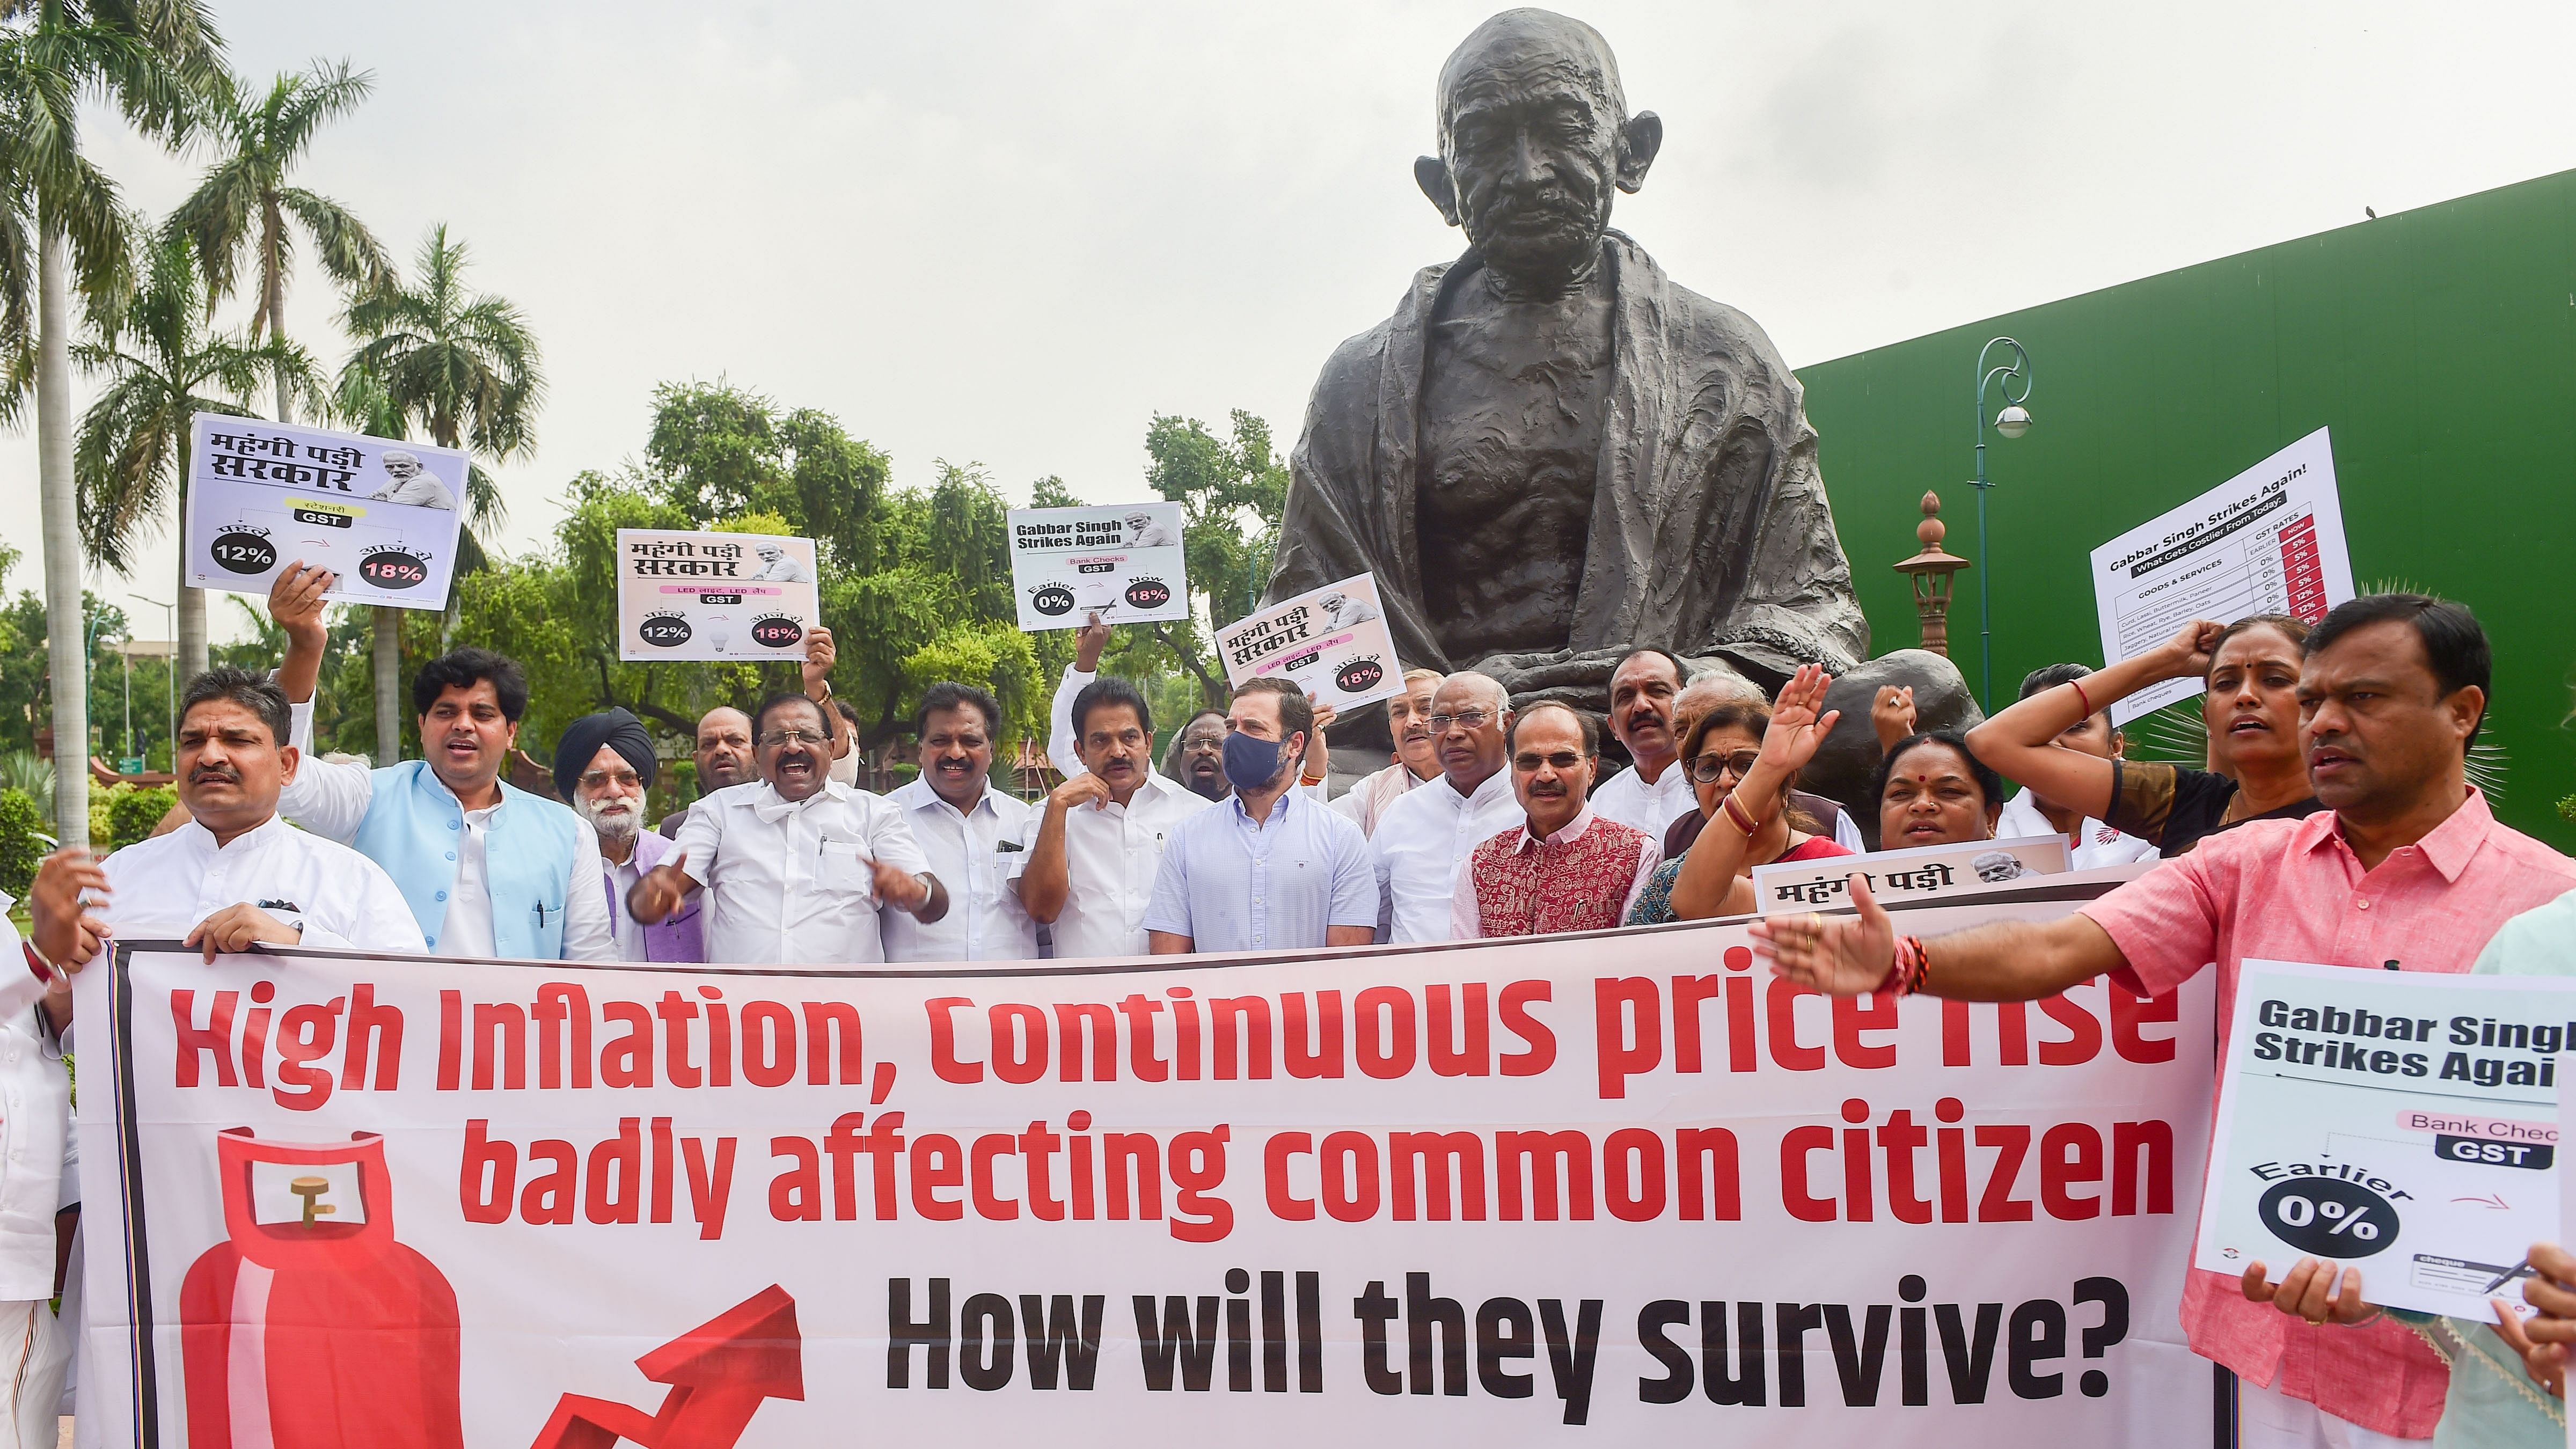 Besides Congress leader Rahul Gandhi, some opposition MPs including Supriya Sule of the NCP, Ram Gopal Yadav of the Samajwadi party and Priyanka Chaturvedi of the Shiv Sena were present during the protest which was held in front of Mahatma Gandhi's statue in Parliament complex. Credit: PTI